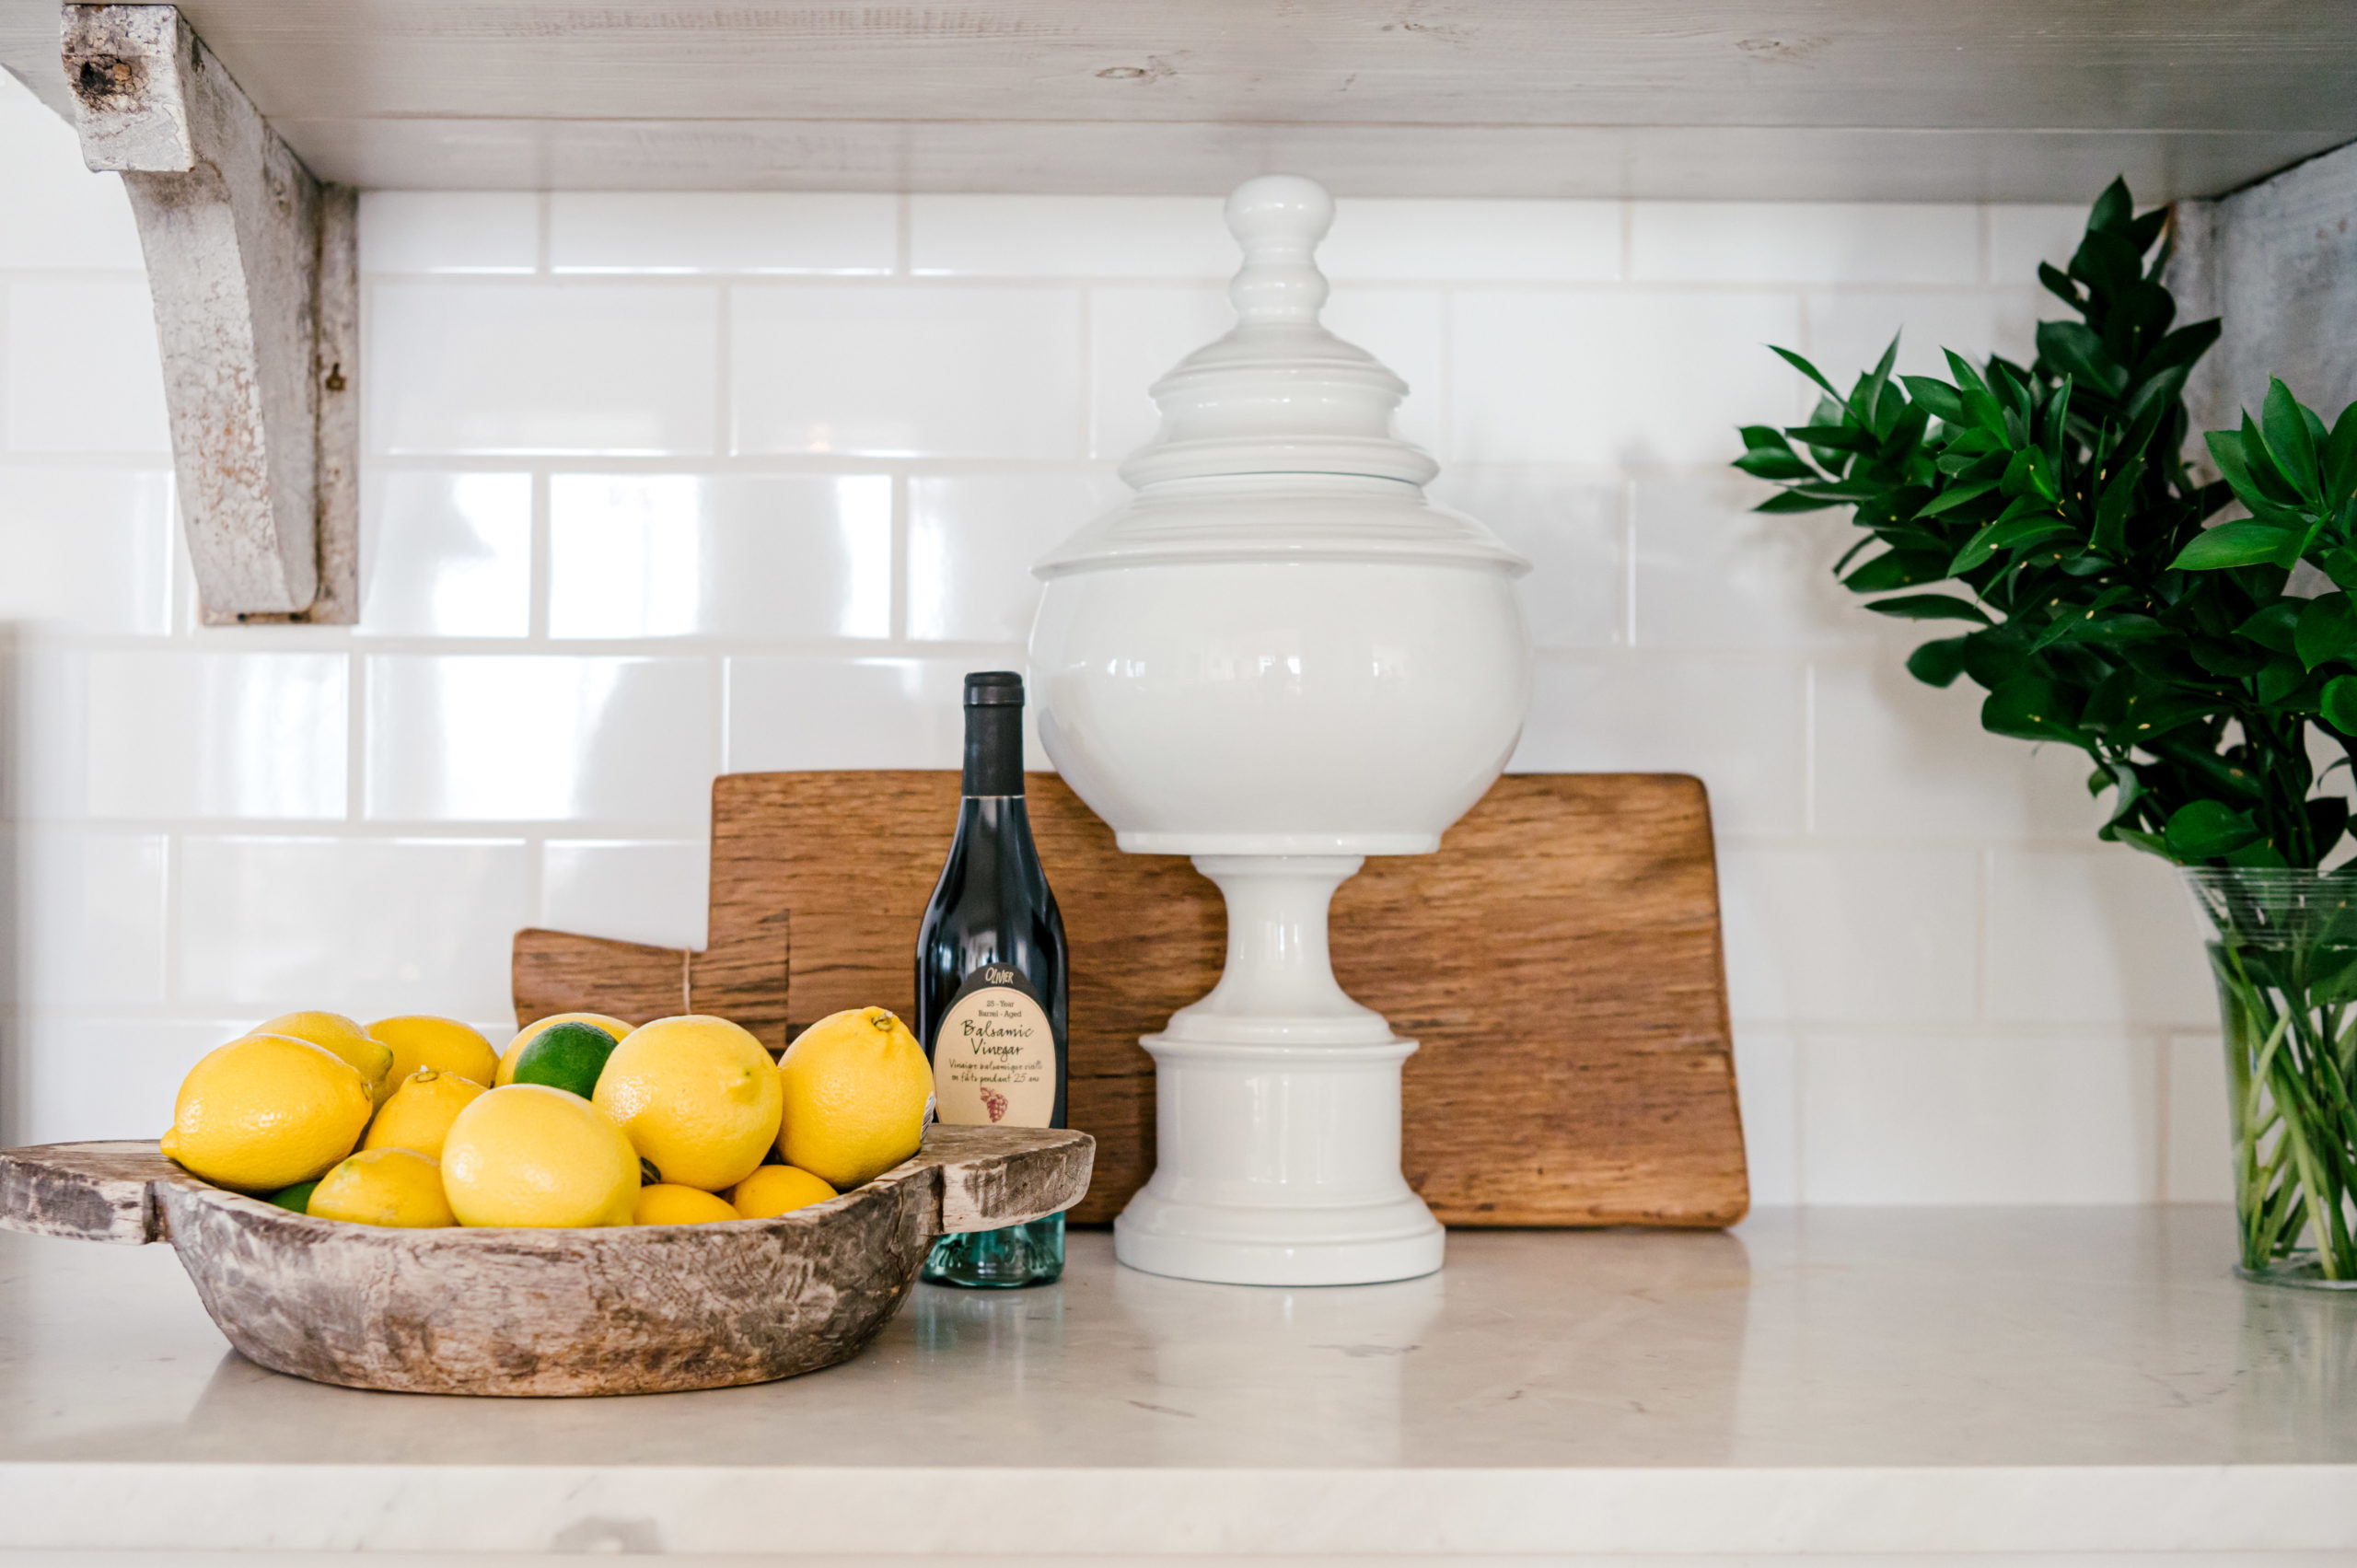 Interior Photography of kitchen counter with lemons and cutting boards with backsplash white subway tiles